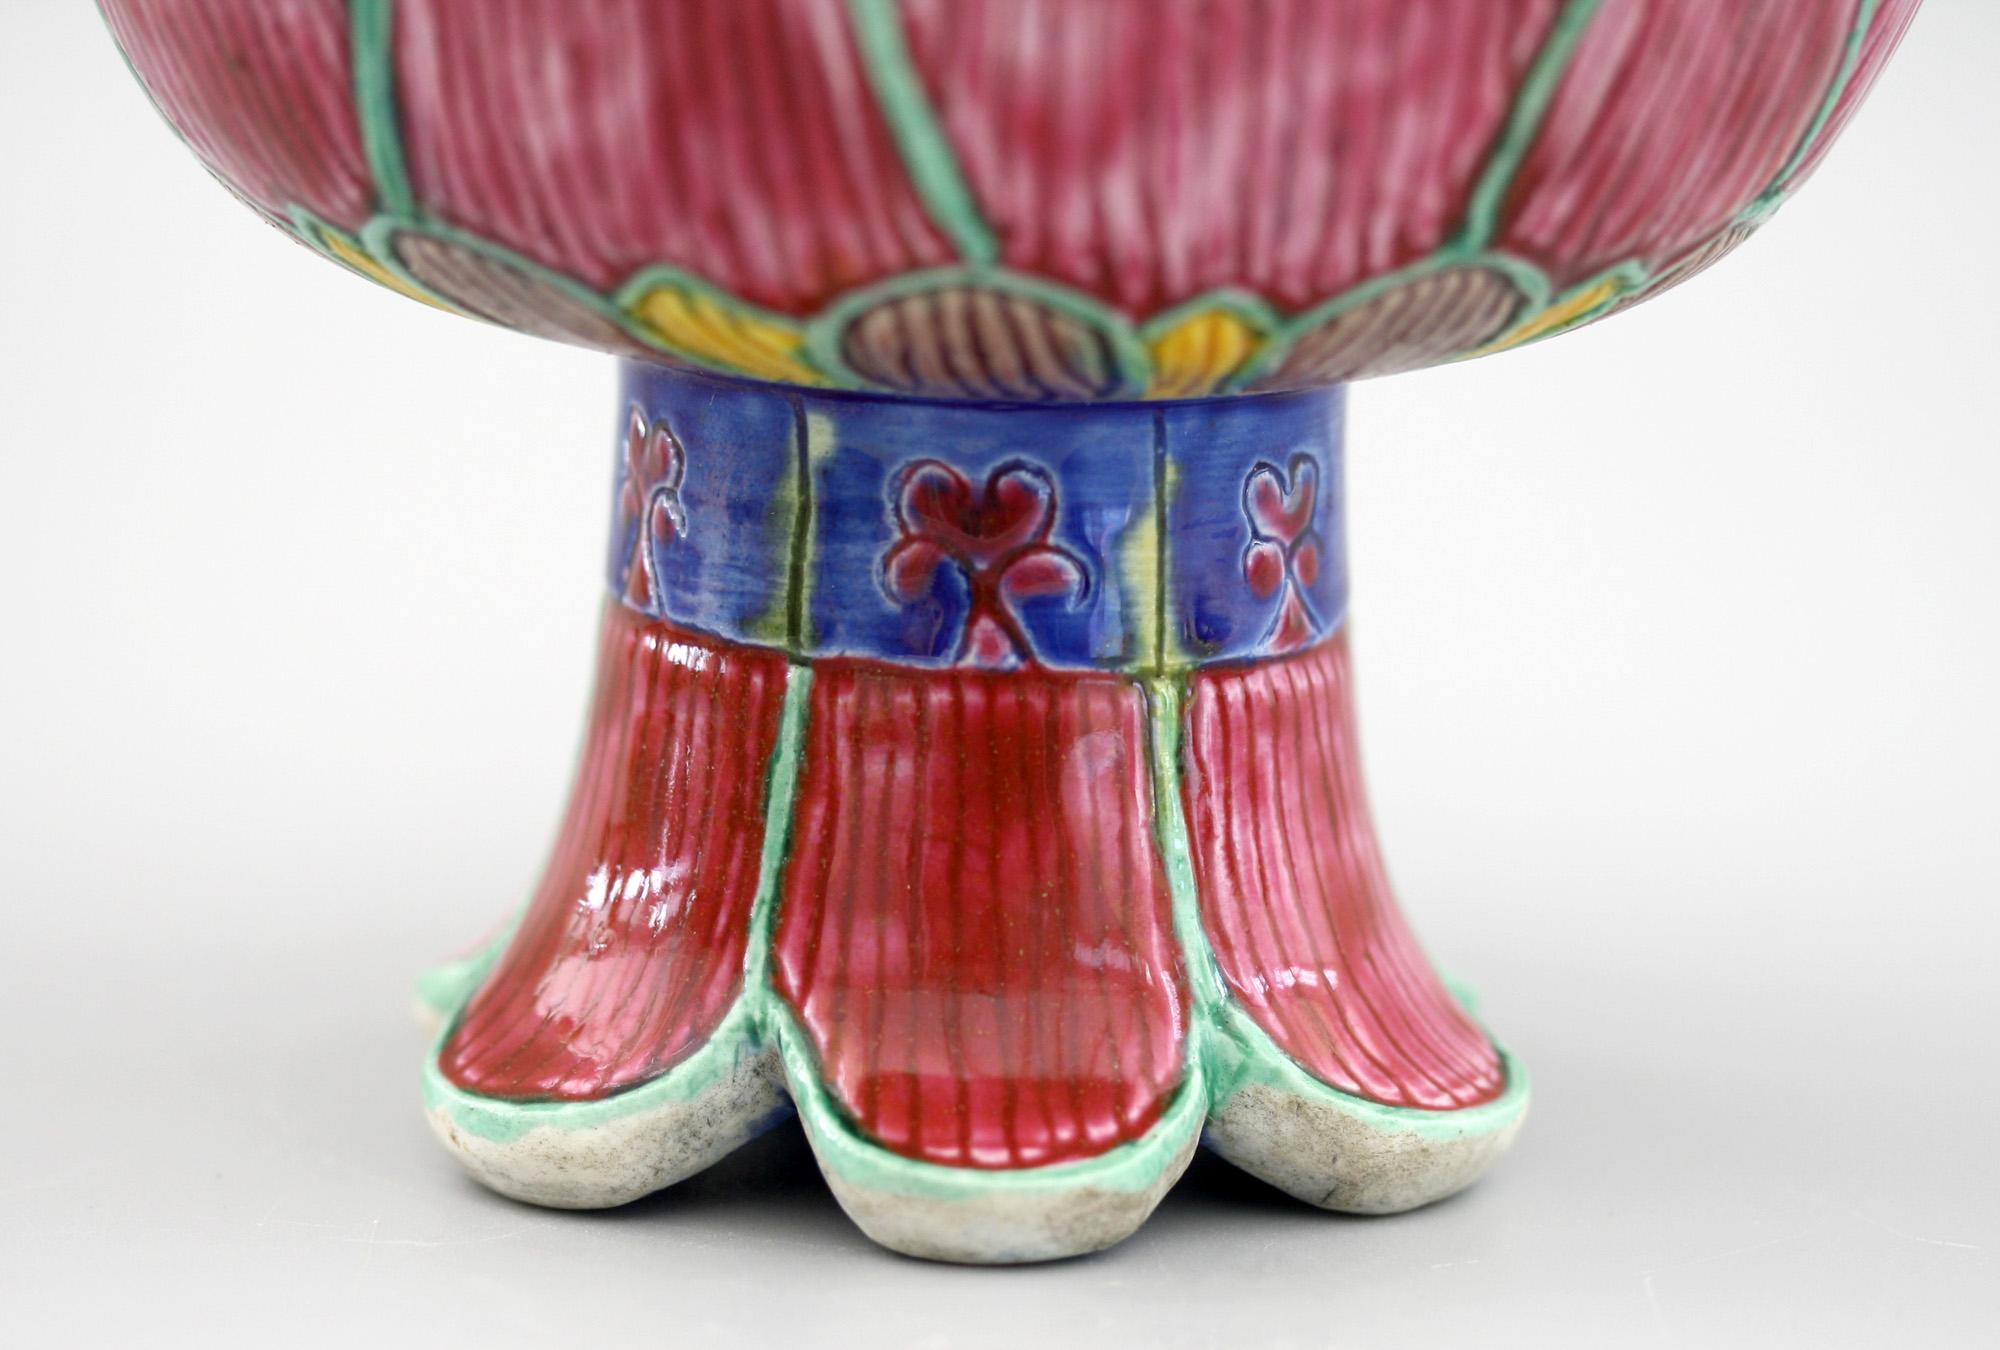 A very unusual antique Chinese porcelain pedestal lotus flower shaped bowl hand painted in bold solid colors believed to date from the early 20th century or possibly earlier. The lotus flower shaped bowl stands raised on a leaf shaped base the